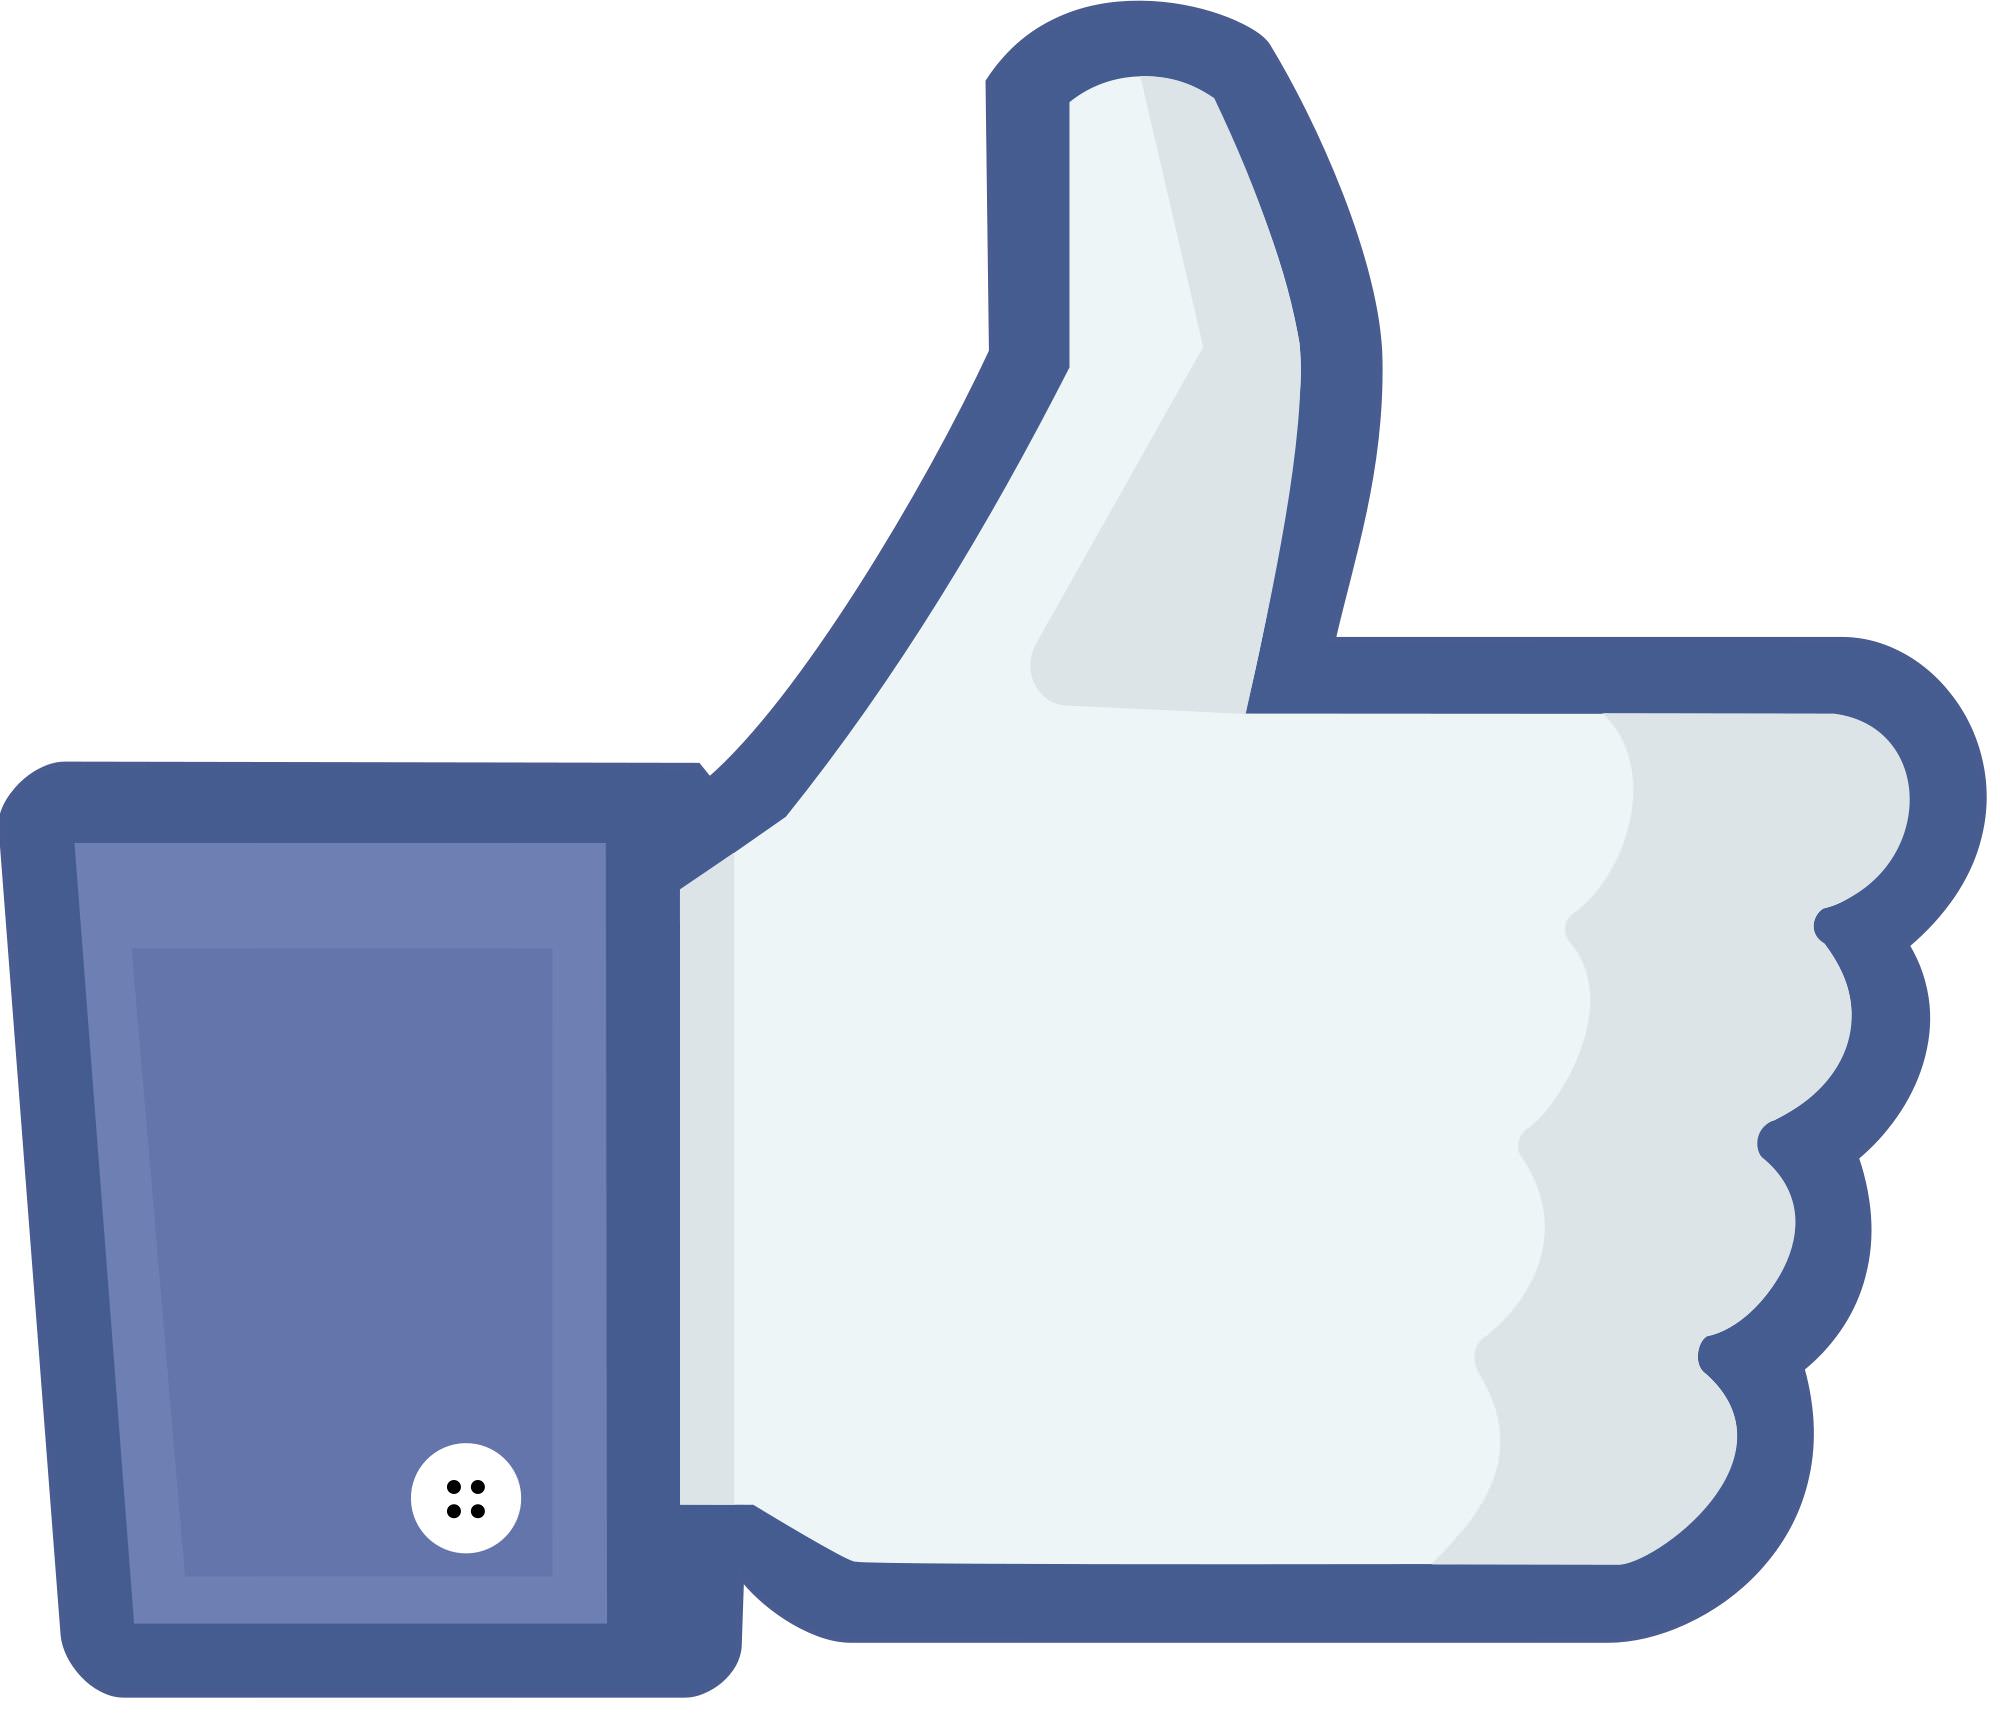 16 Facebook Tips For Users You Wish You Knew Earlier